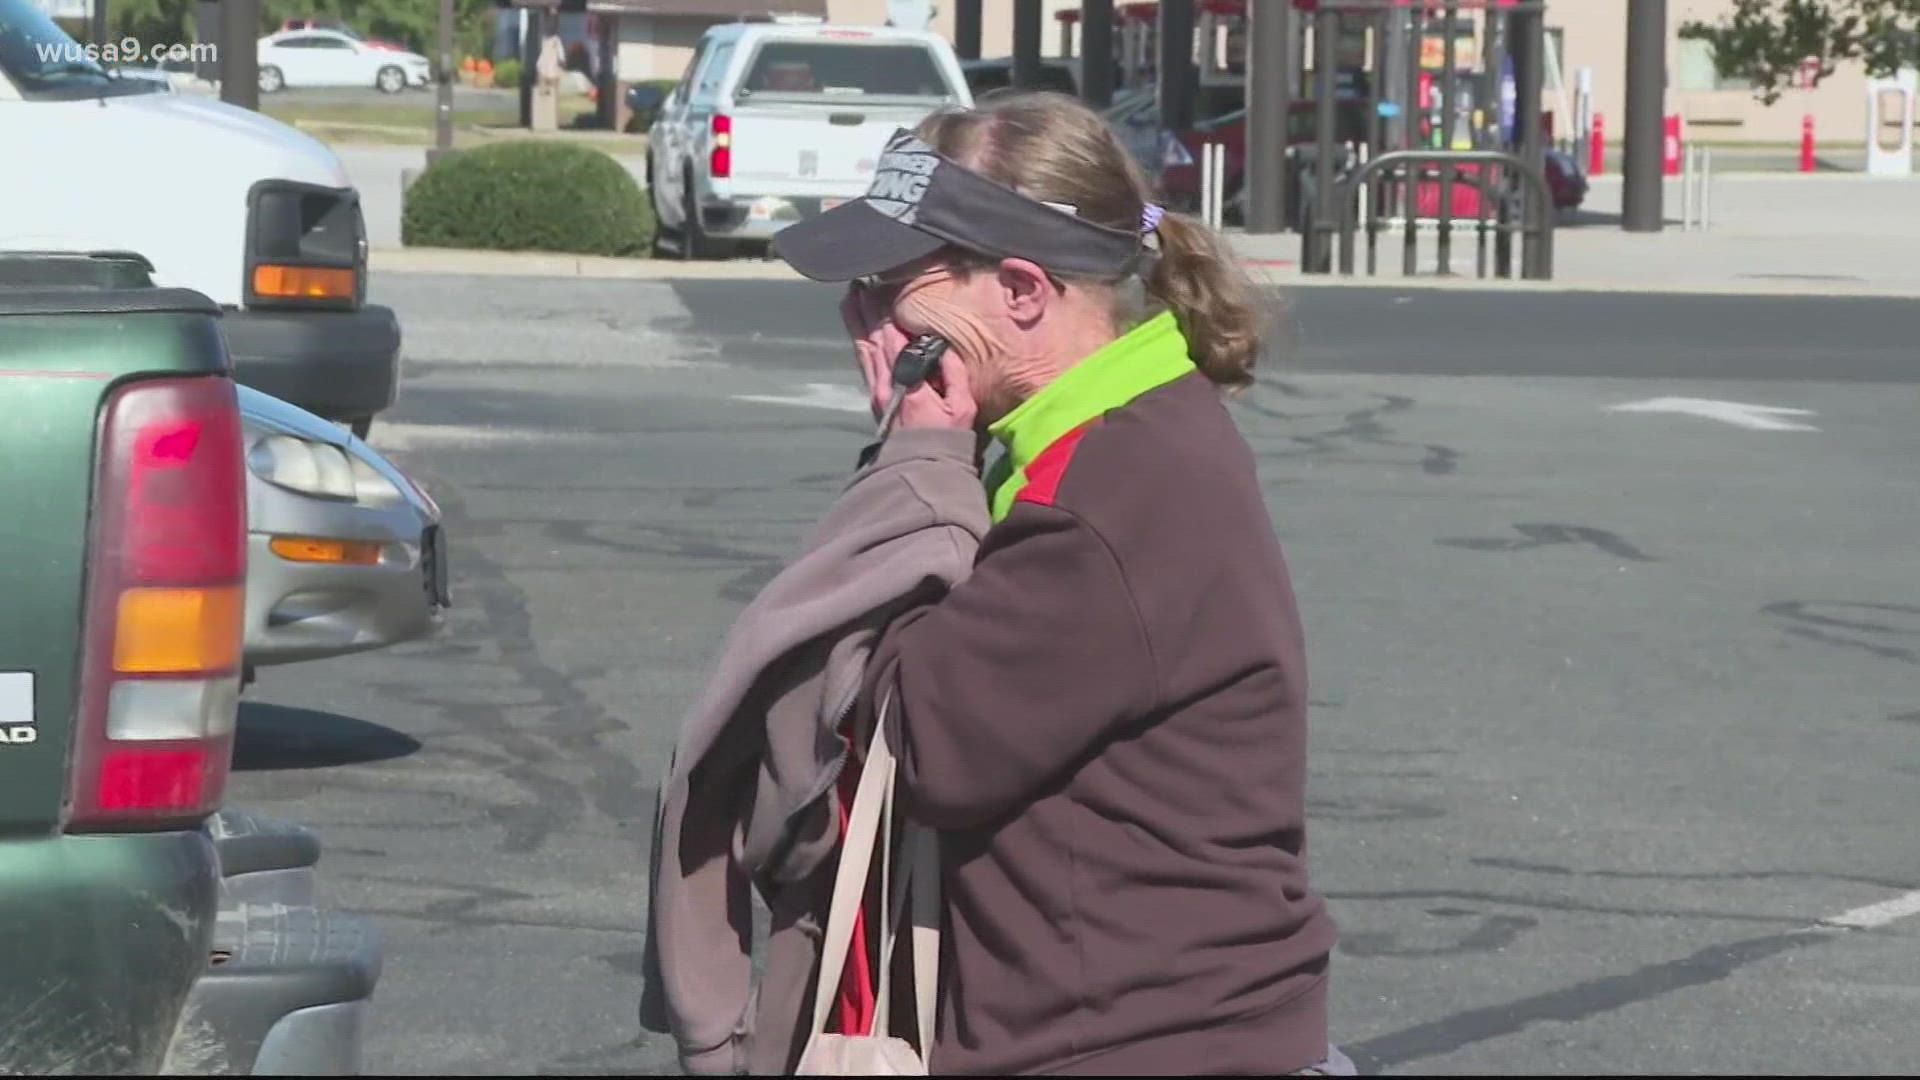 When customers saw Lisa walking to work, they came together to give her a big surprise.